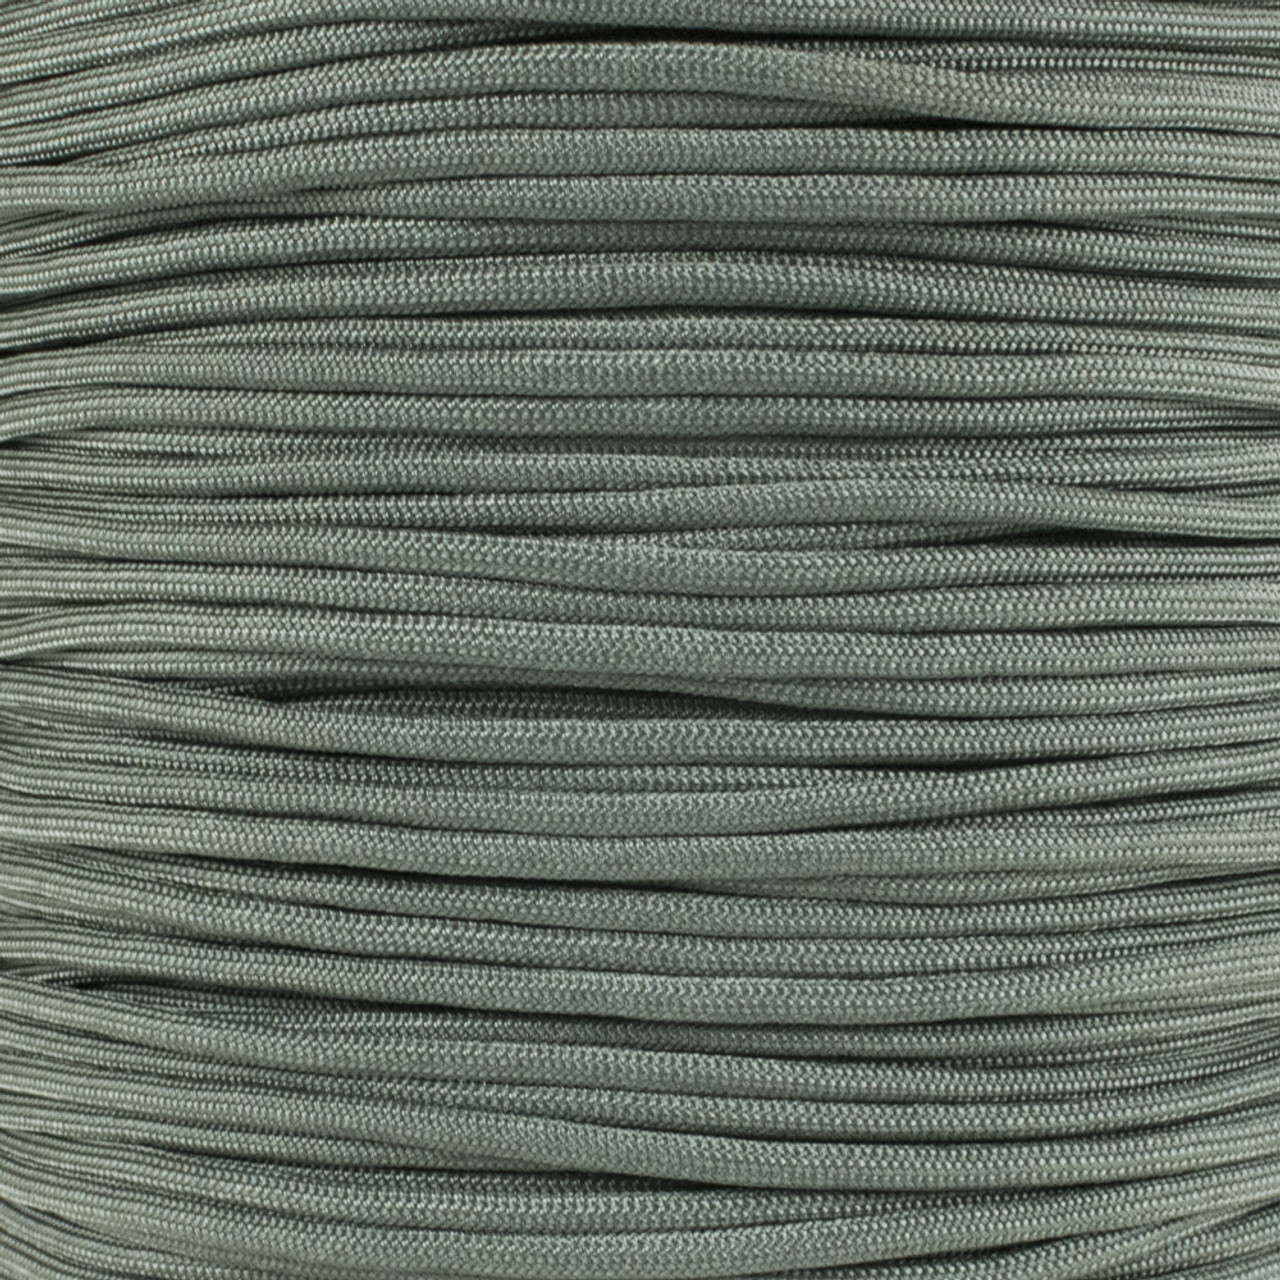 Green Type MIL-C-5040 Paracord | Paracord Planet